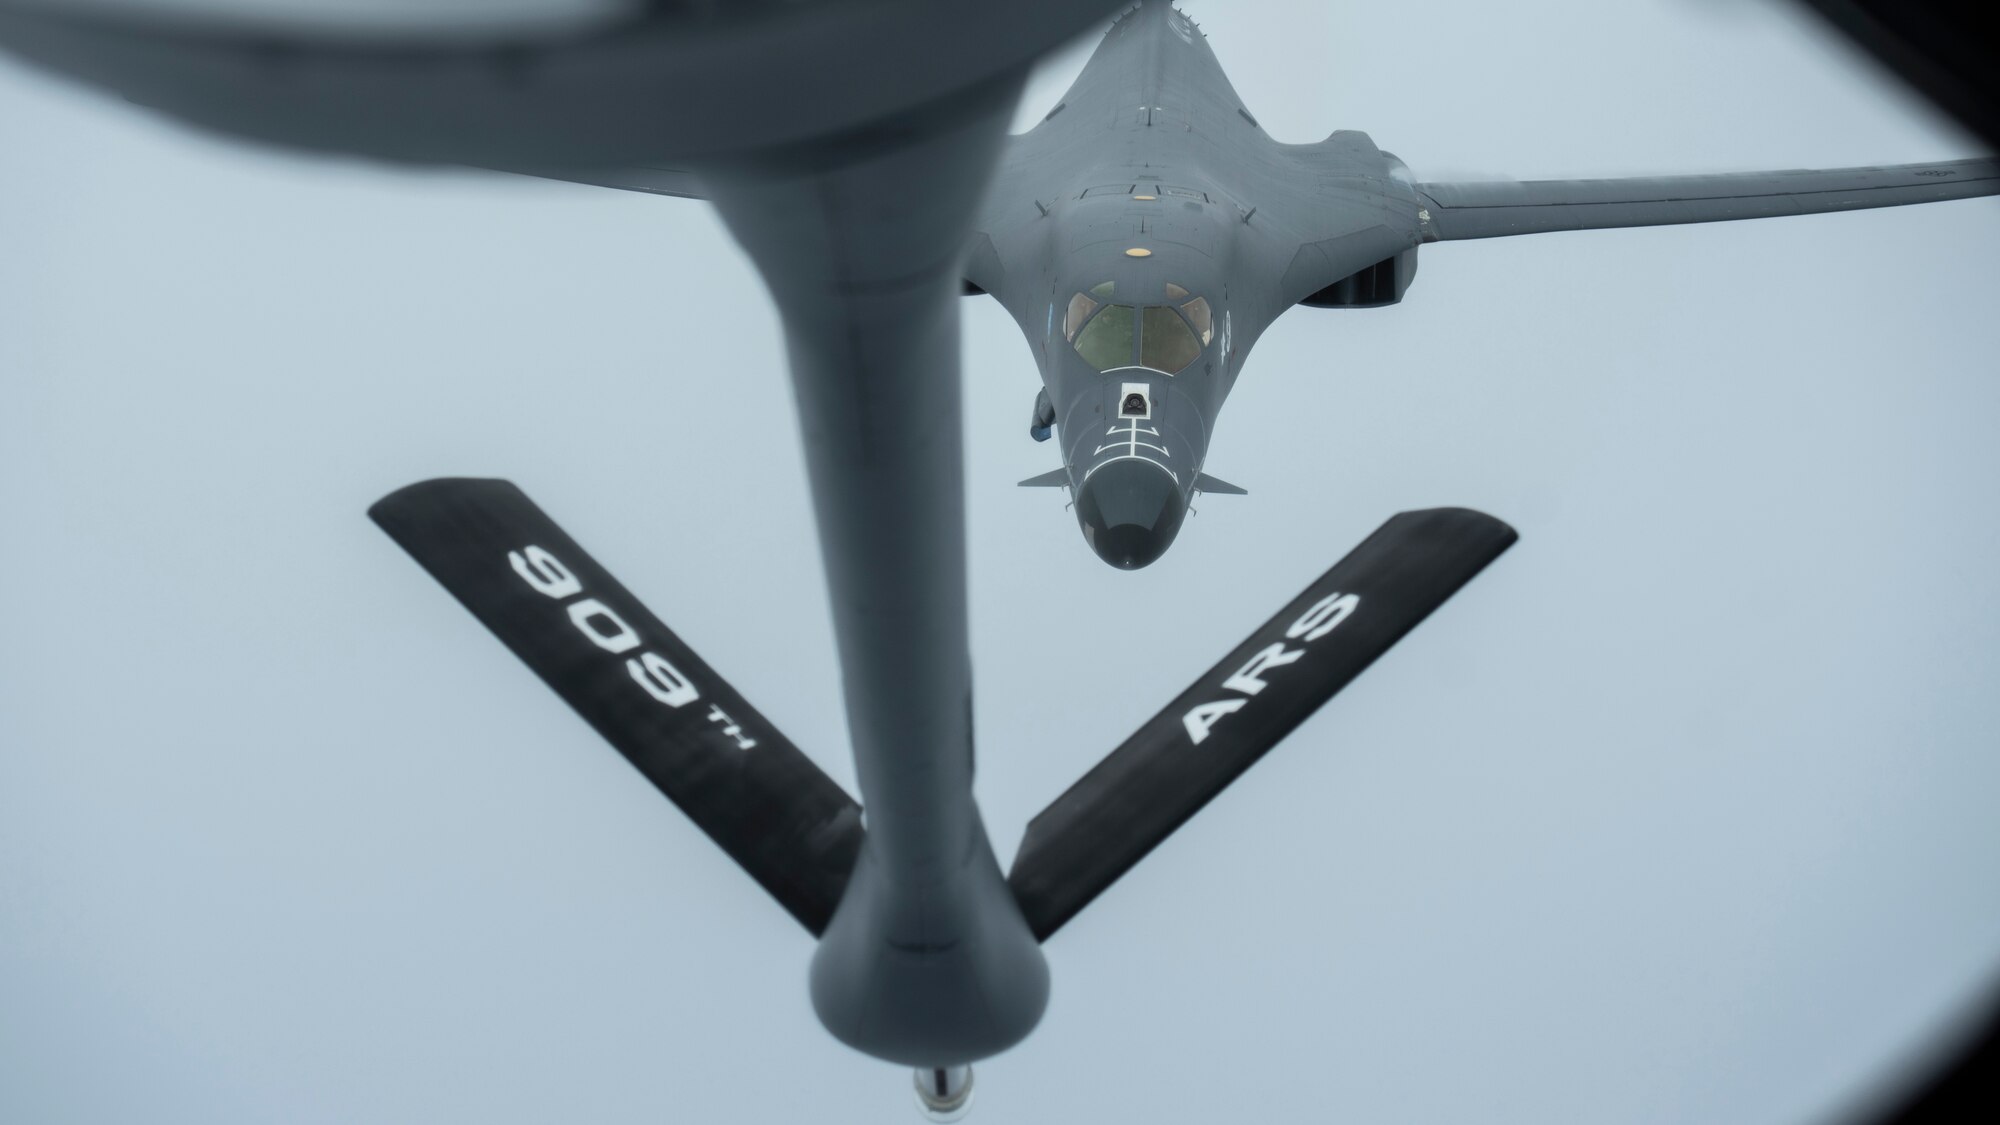 A 28th Bomber Wing B-1B Lancer, from Ellsworth Air Force Base, S.D., conducts aerial refueling with a 909th Aerial Refueling Squadron KC-135 Stratotanker, from Kadena Air Base, Japan, during a Bomber Task Force (BTF) mission, July 27, 2020. The BTF supports the U.S. Air Force’s dynamic force employment model in line with the National Defense Strategy’s objectives of strategic predictability with persistent bomber presence. (U.S. Air Force photo by Staff Sgt. Peter Reft)